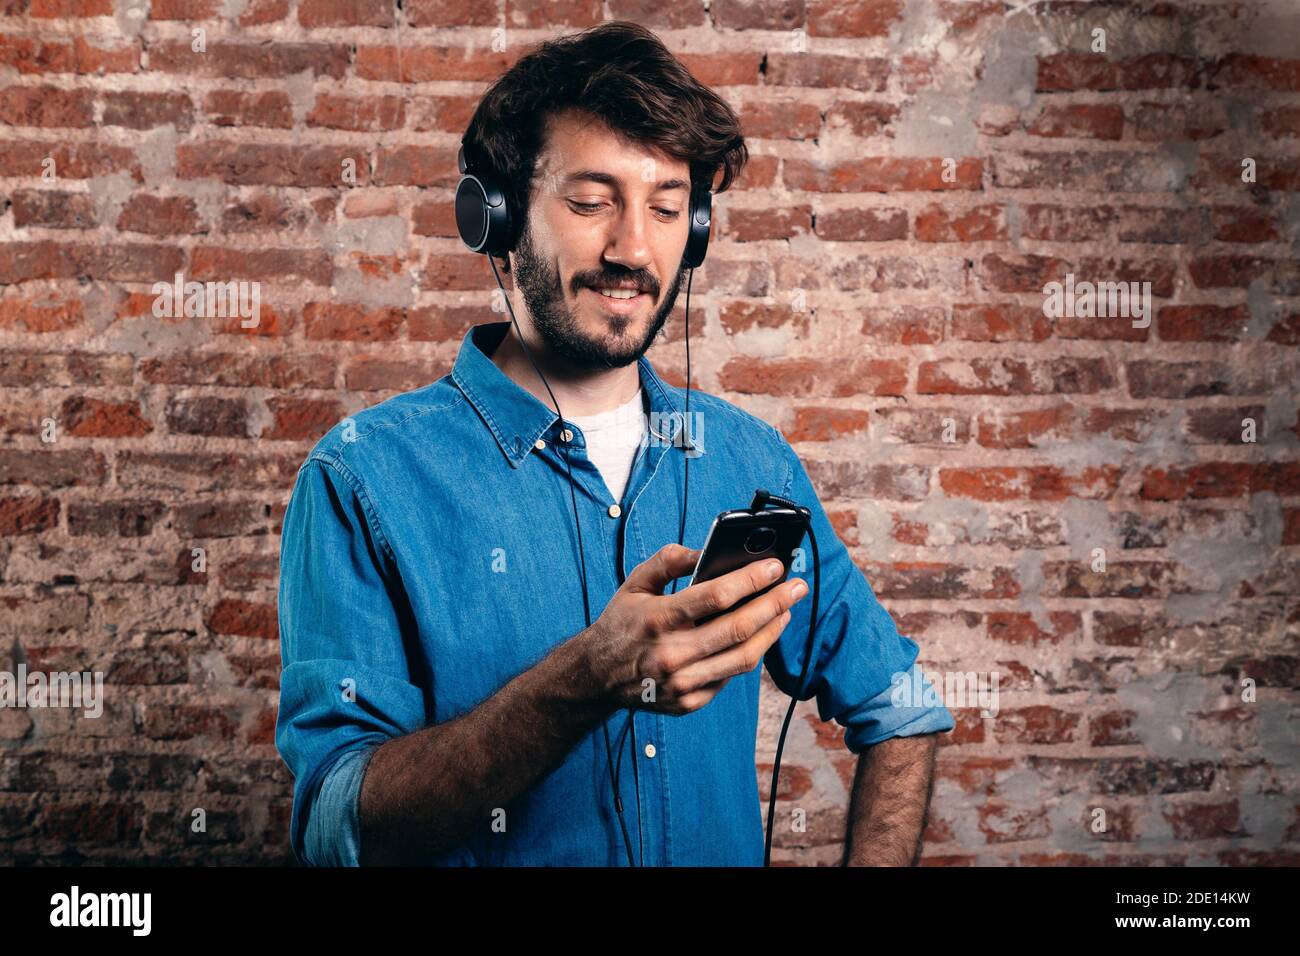 Portrait of smiling young man with earphones and cell phone. Casual wear and brick wall of background. Stock Photo